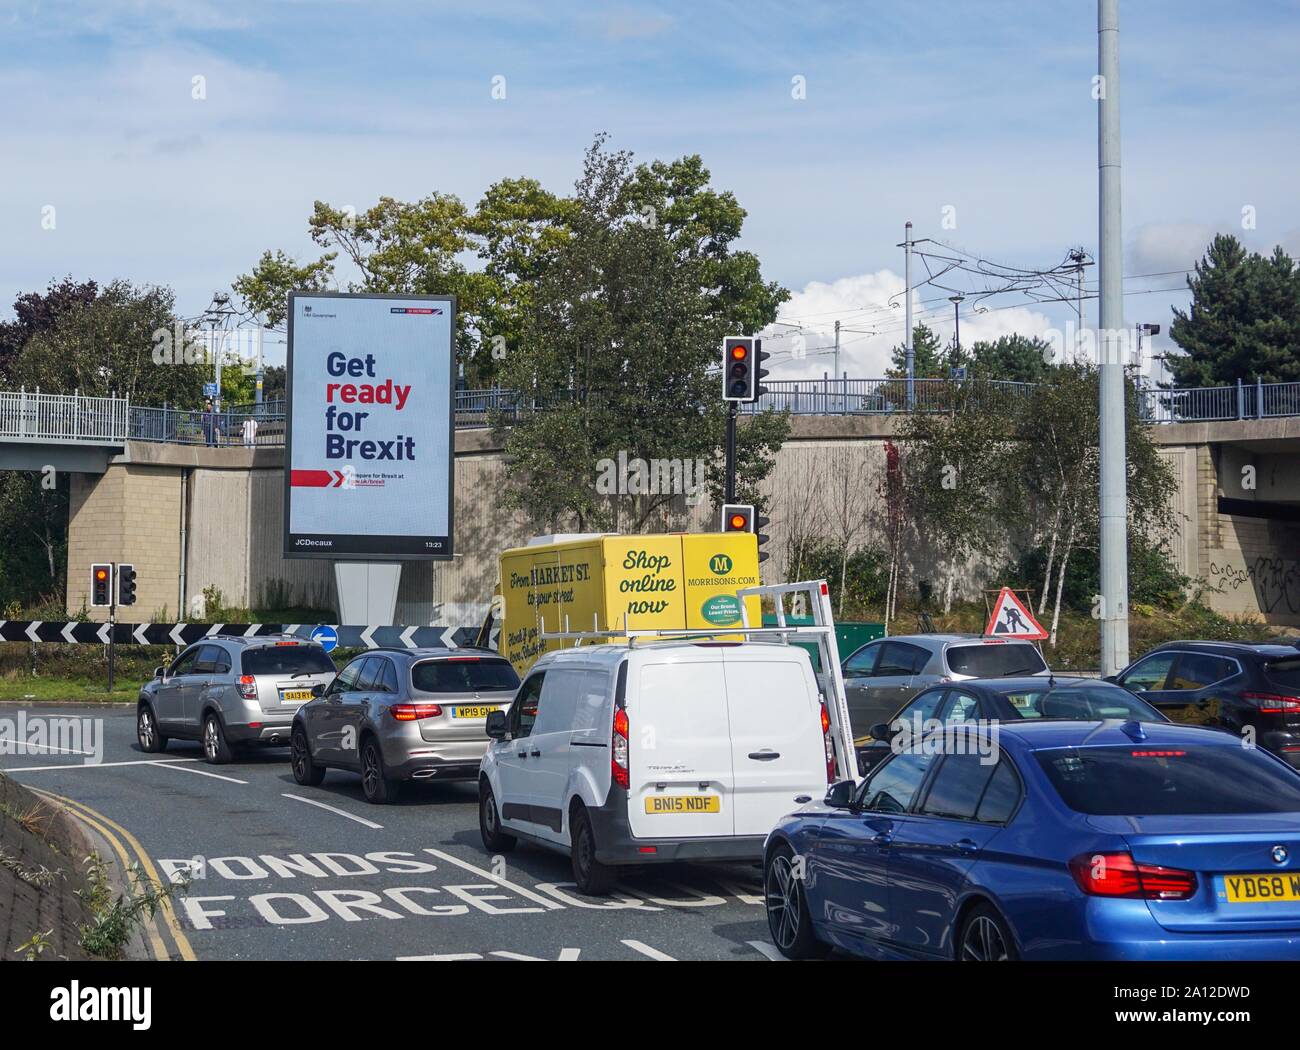 Sheffield , UK. 23 SEPTEMBER, 2019.A 'Get ready for Brexit' billboard, is pictured as a  part of a huge government campaign in Park Lane , in Sheffield , England on 23 September 2019. (Photo by Ioannis Alexopoulos / Alamy Live News) Stock Photo